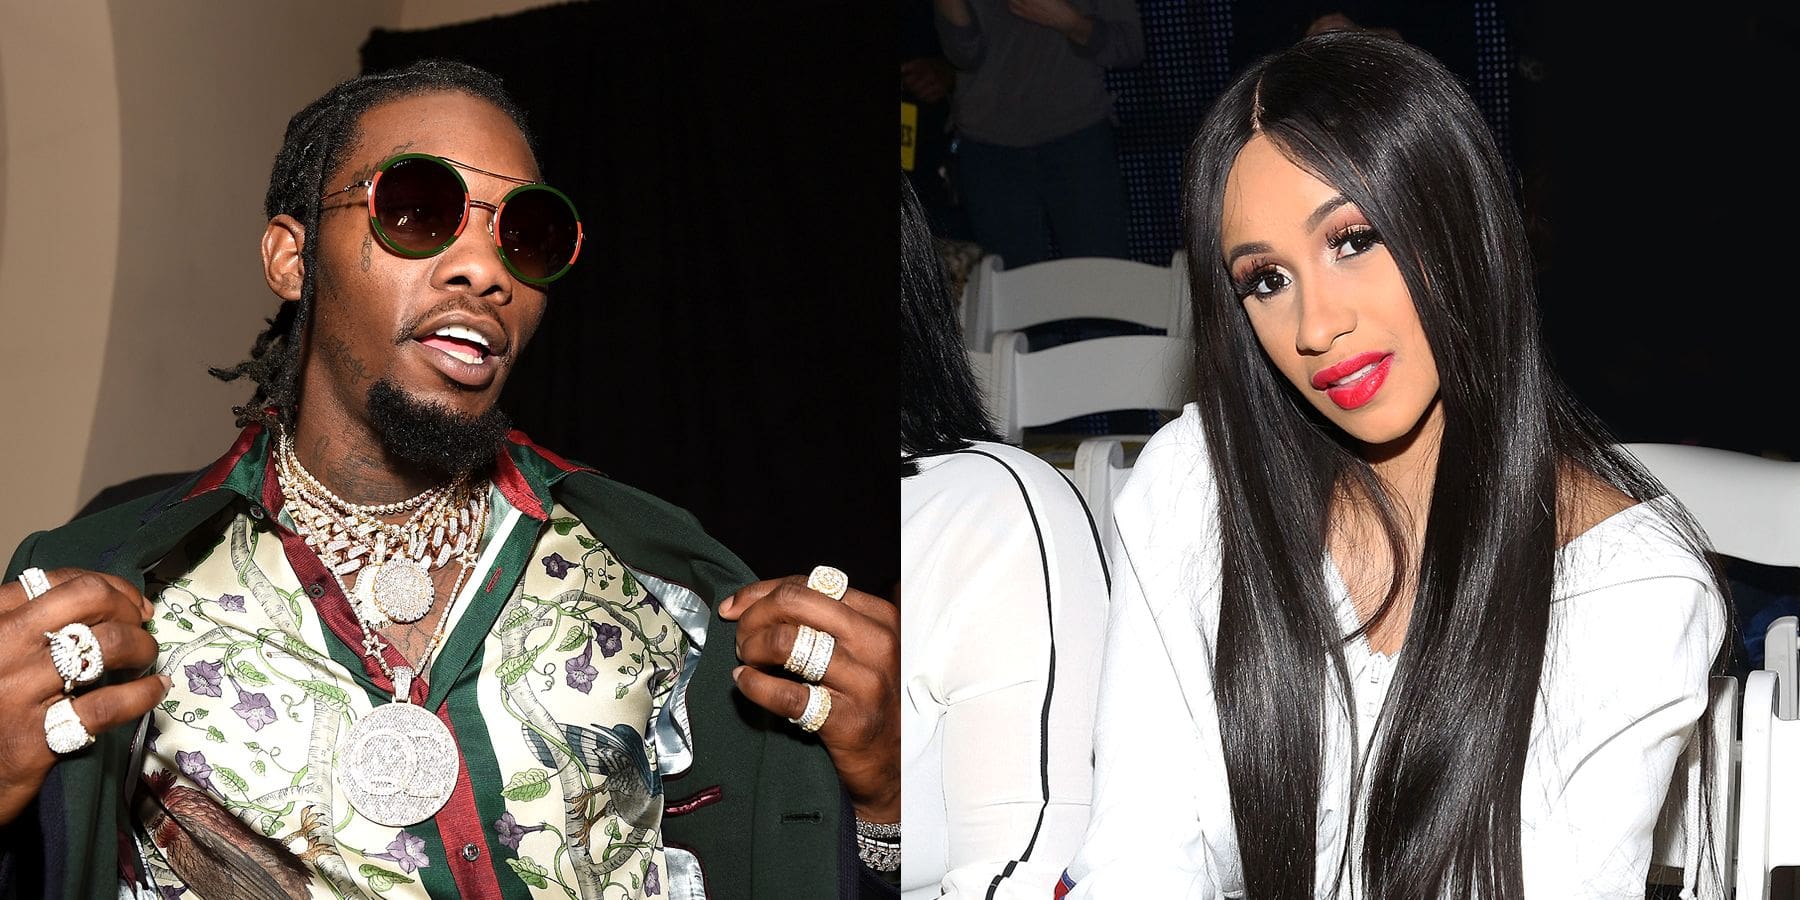 Cardi B Is Reportedly Heartbroken After Her And Offset's Trip To Australia Got Canceled Following Their Breakup